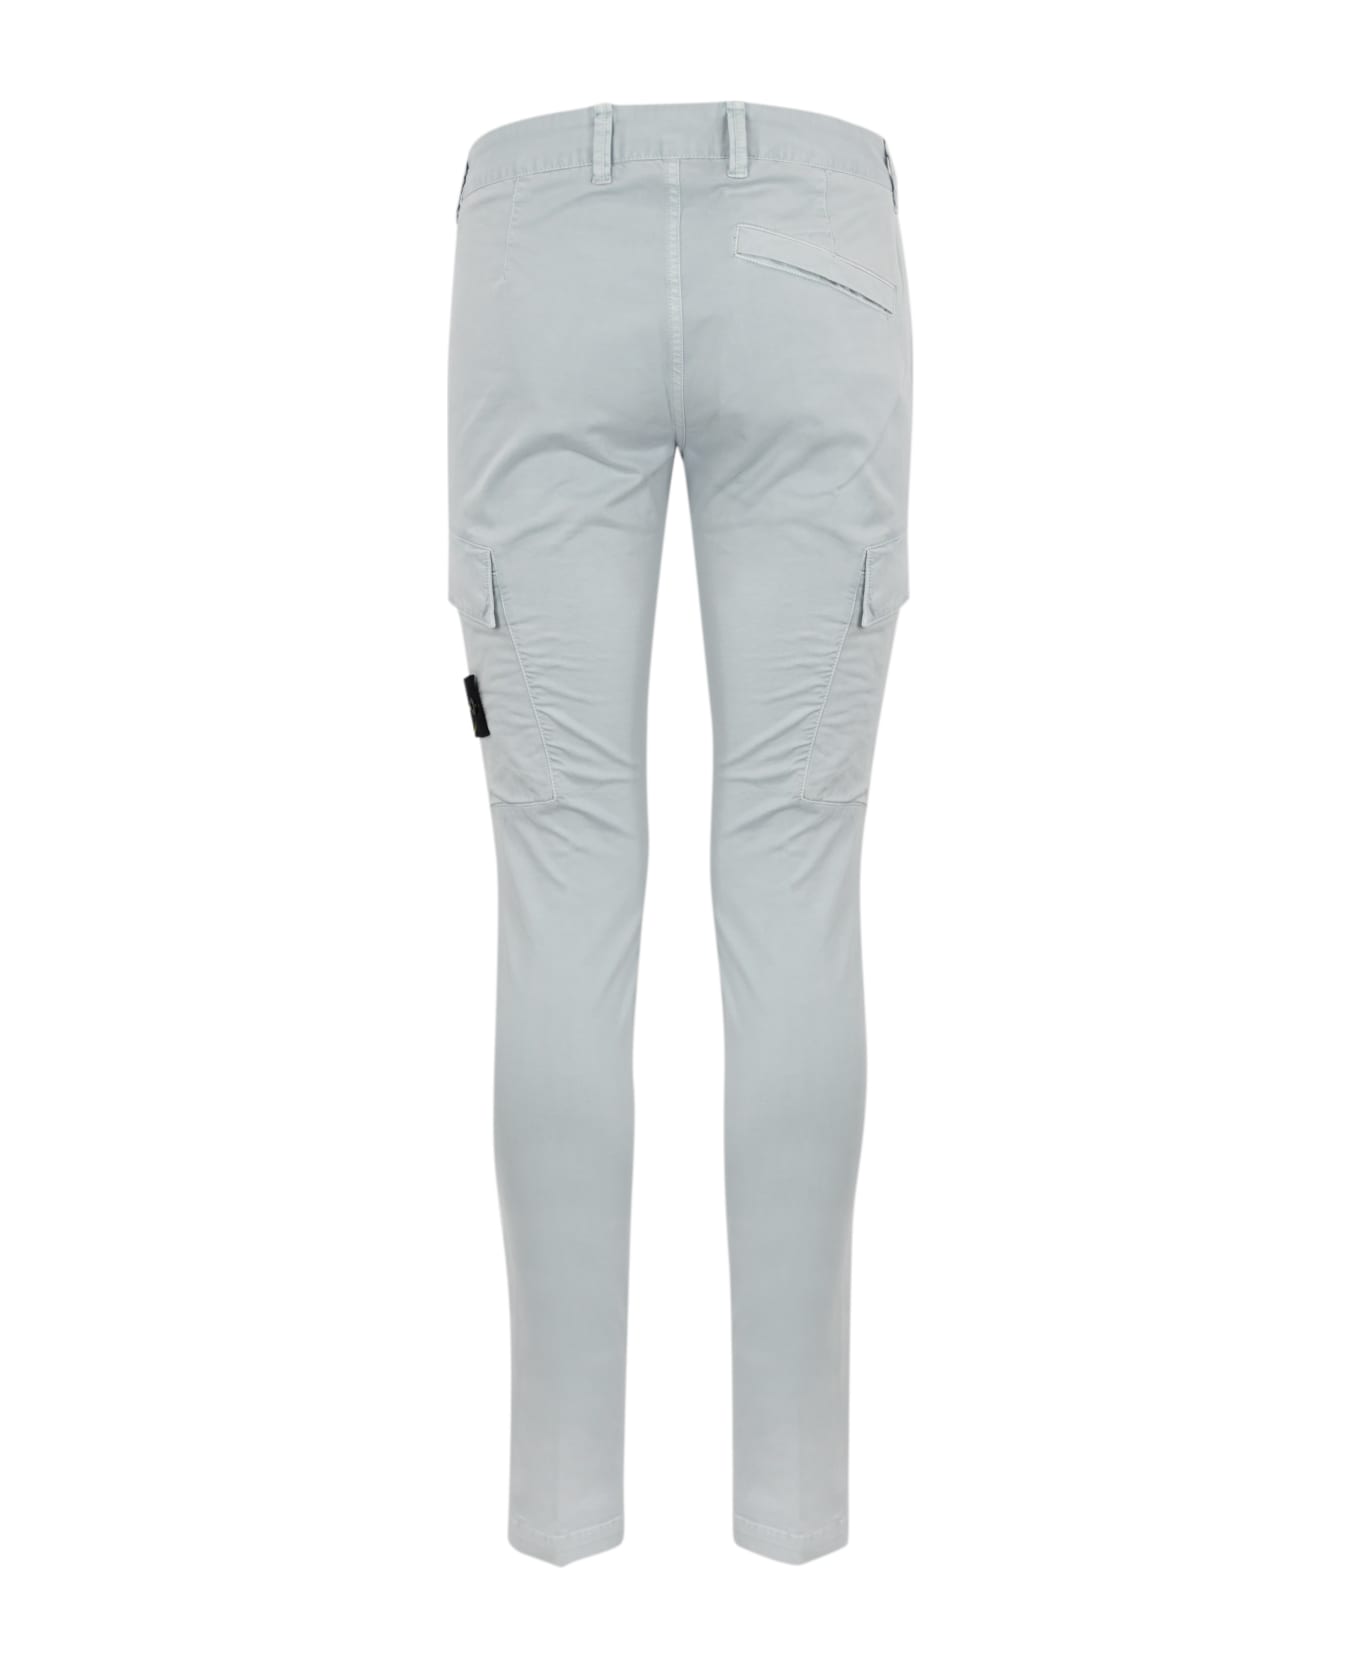 Stone Island Cargo Trousers 30604 Old Treatment - Sky blue ボトムス